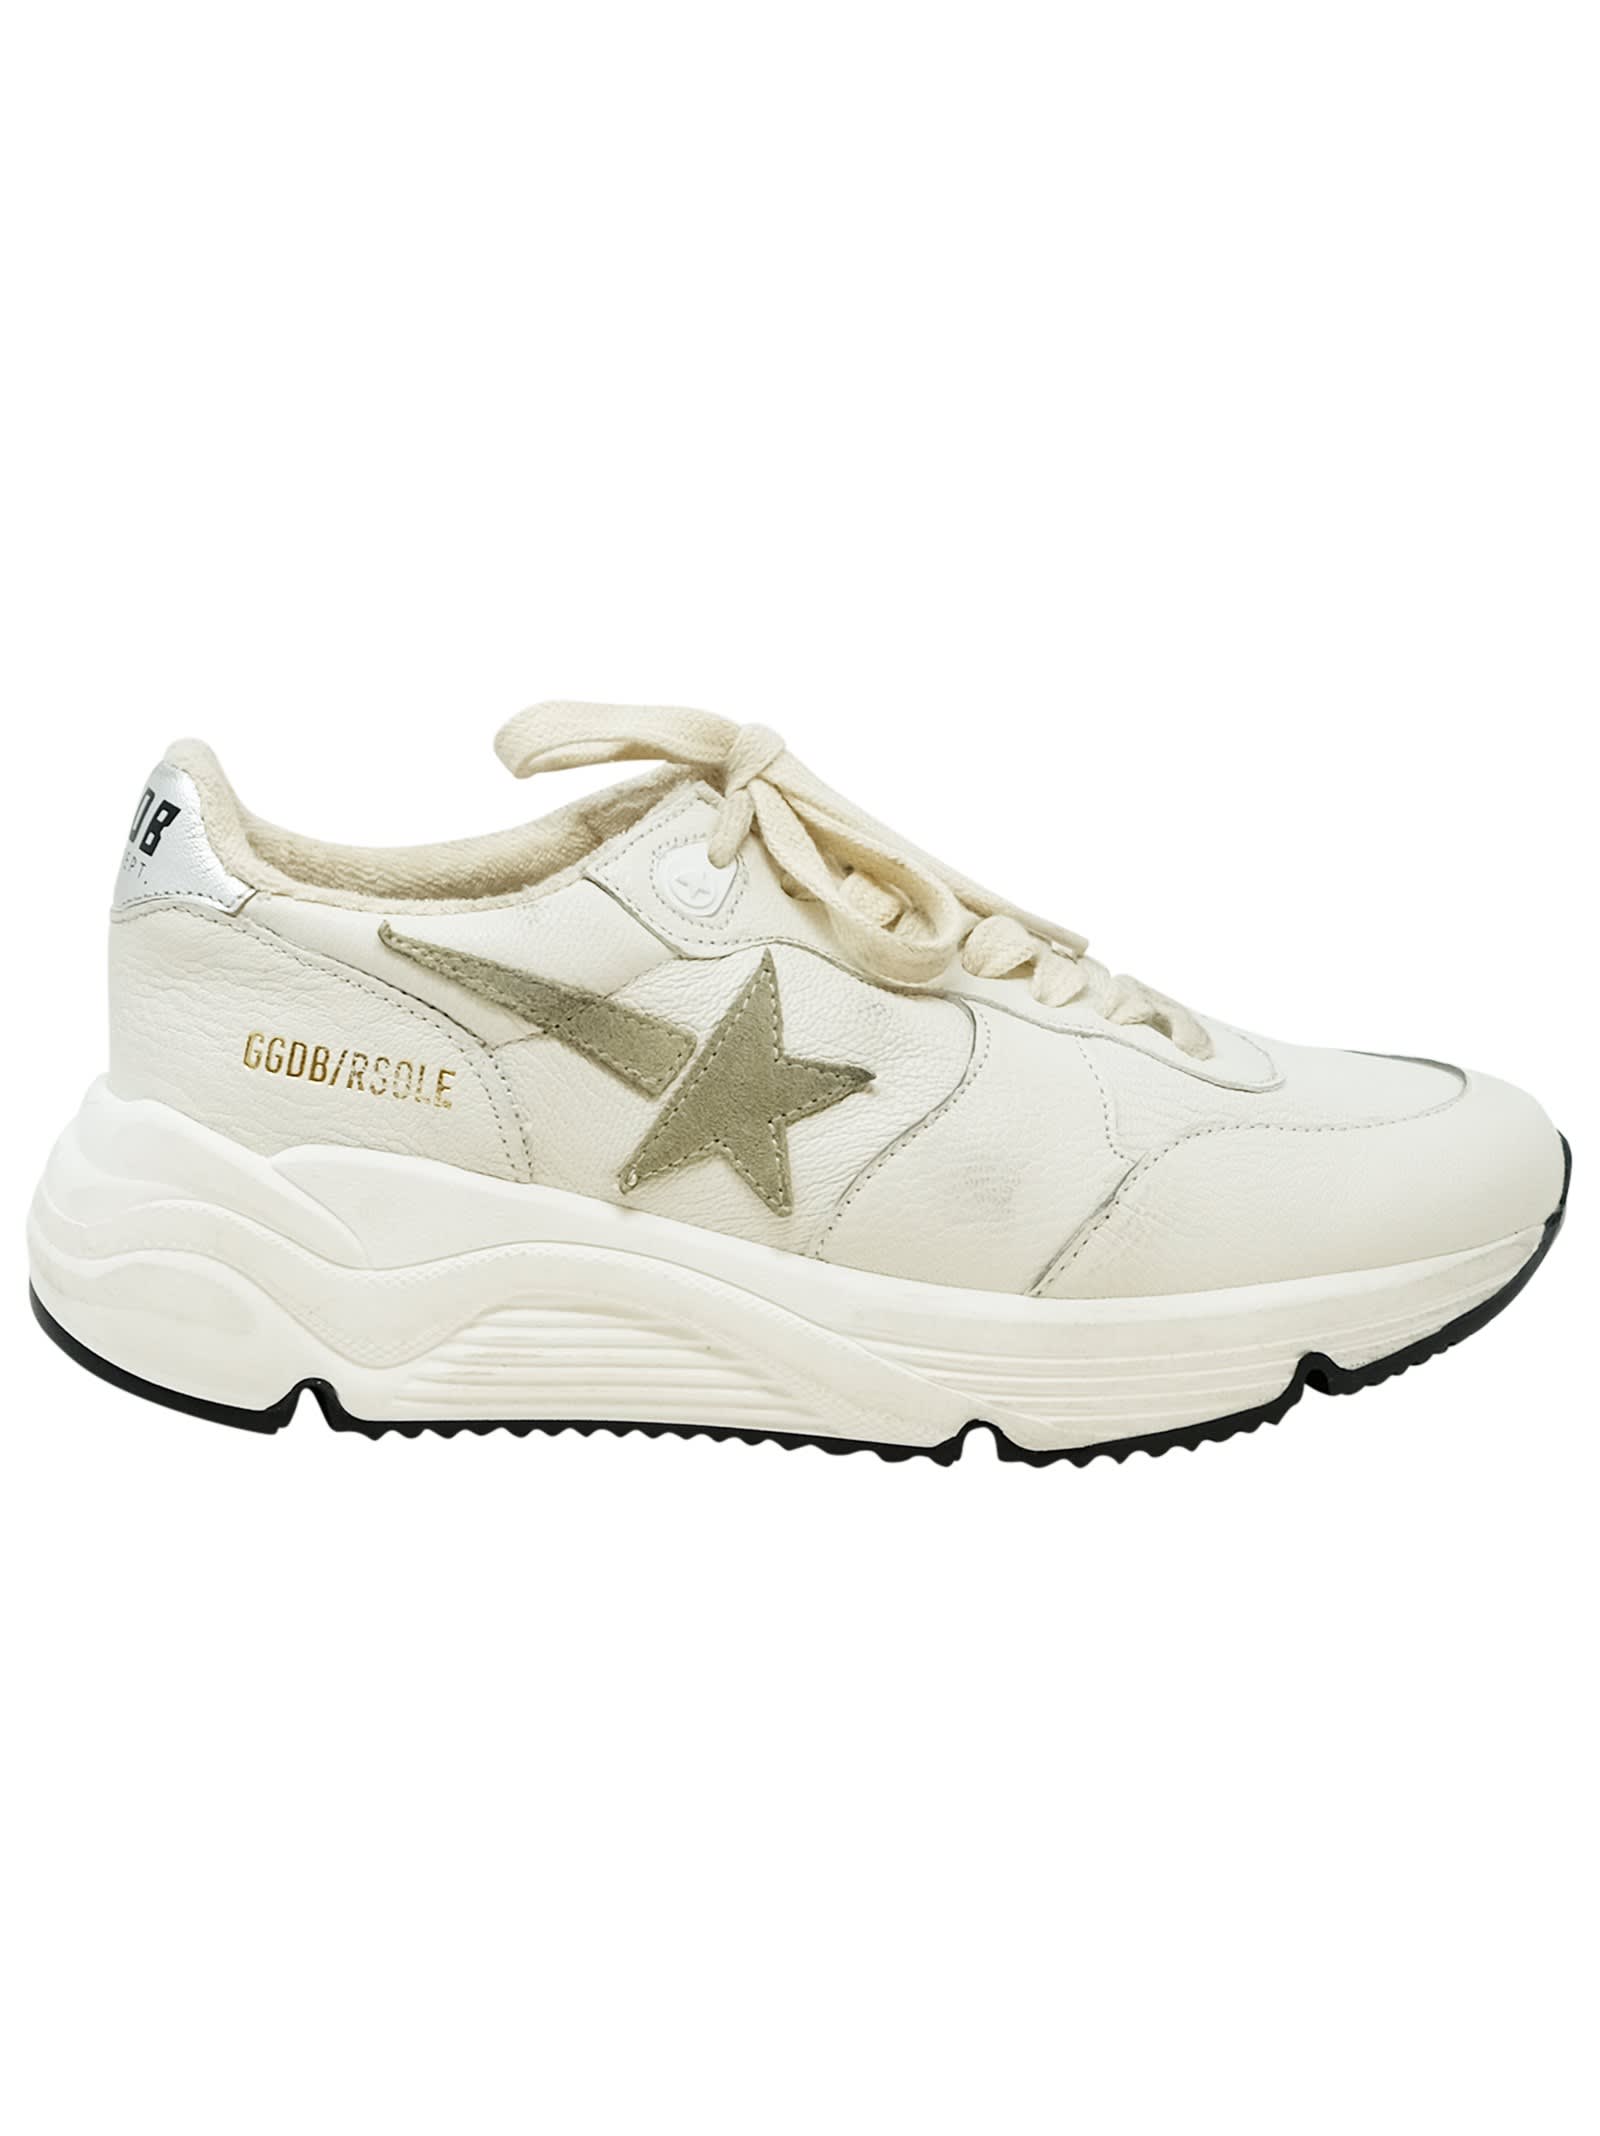 GOLDEN GOOSE GOLDEN GOOSE WHITE LEATHER RUNNING SOLE SNEAKERS